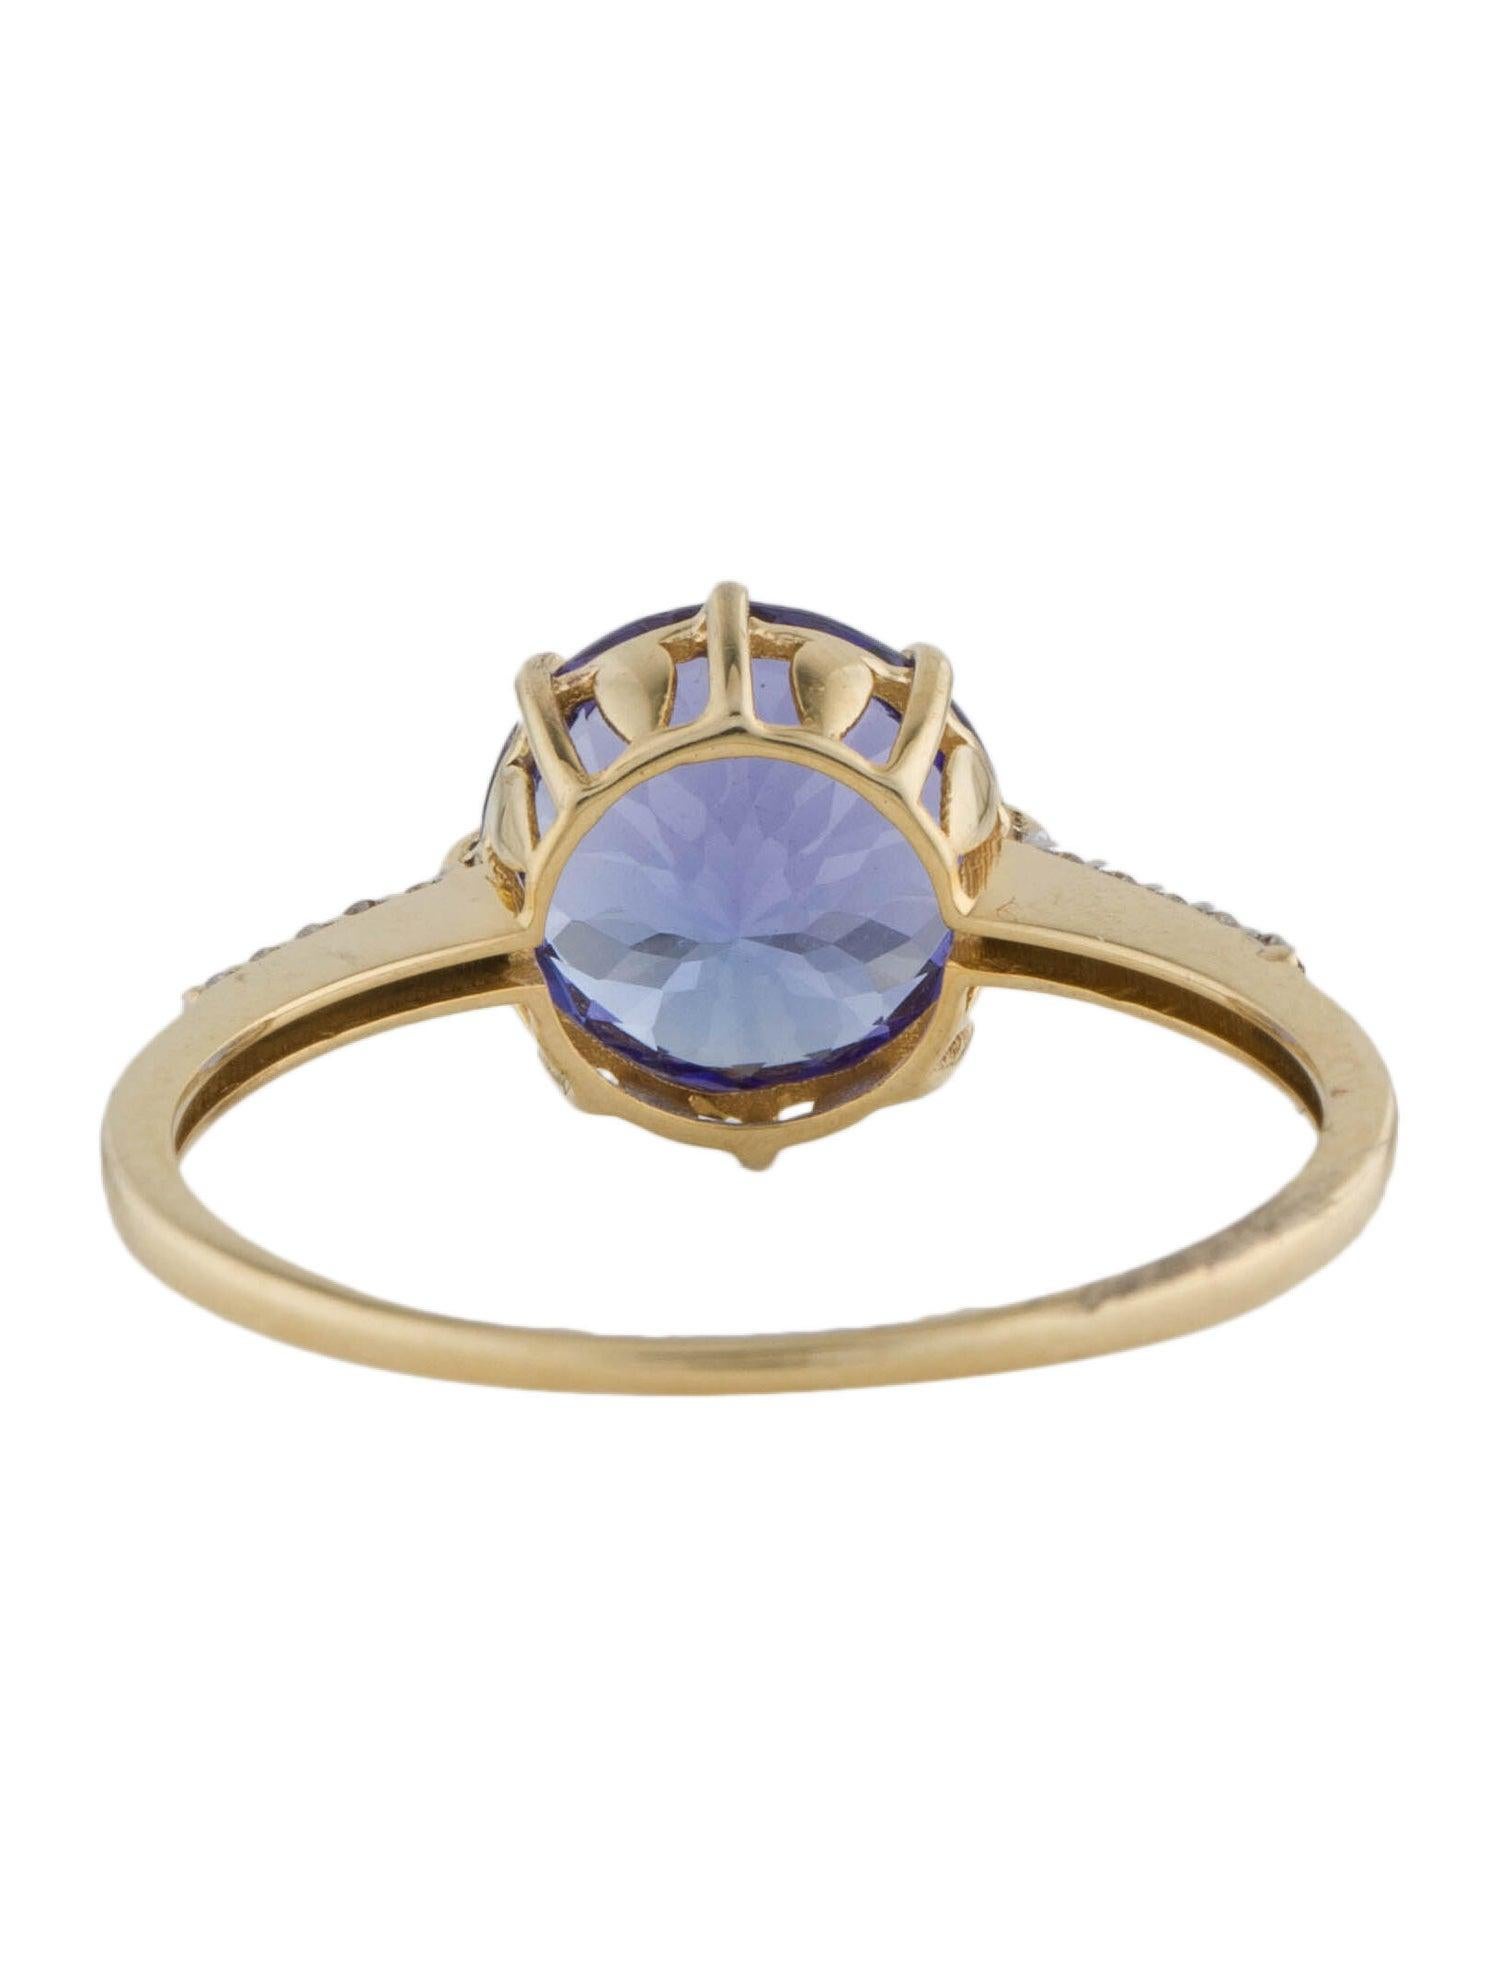 Stunning 14K 2.47ct Tanzanite & Diamond Cocktail Ring, Size 7.25 - Luxury Piece In New Condition For Sale In Holtsville, NY